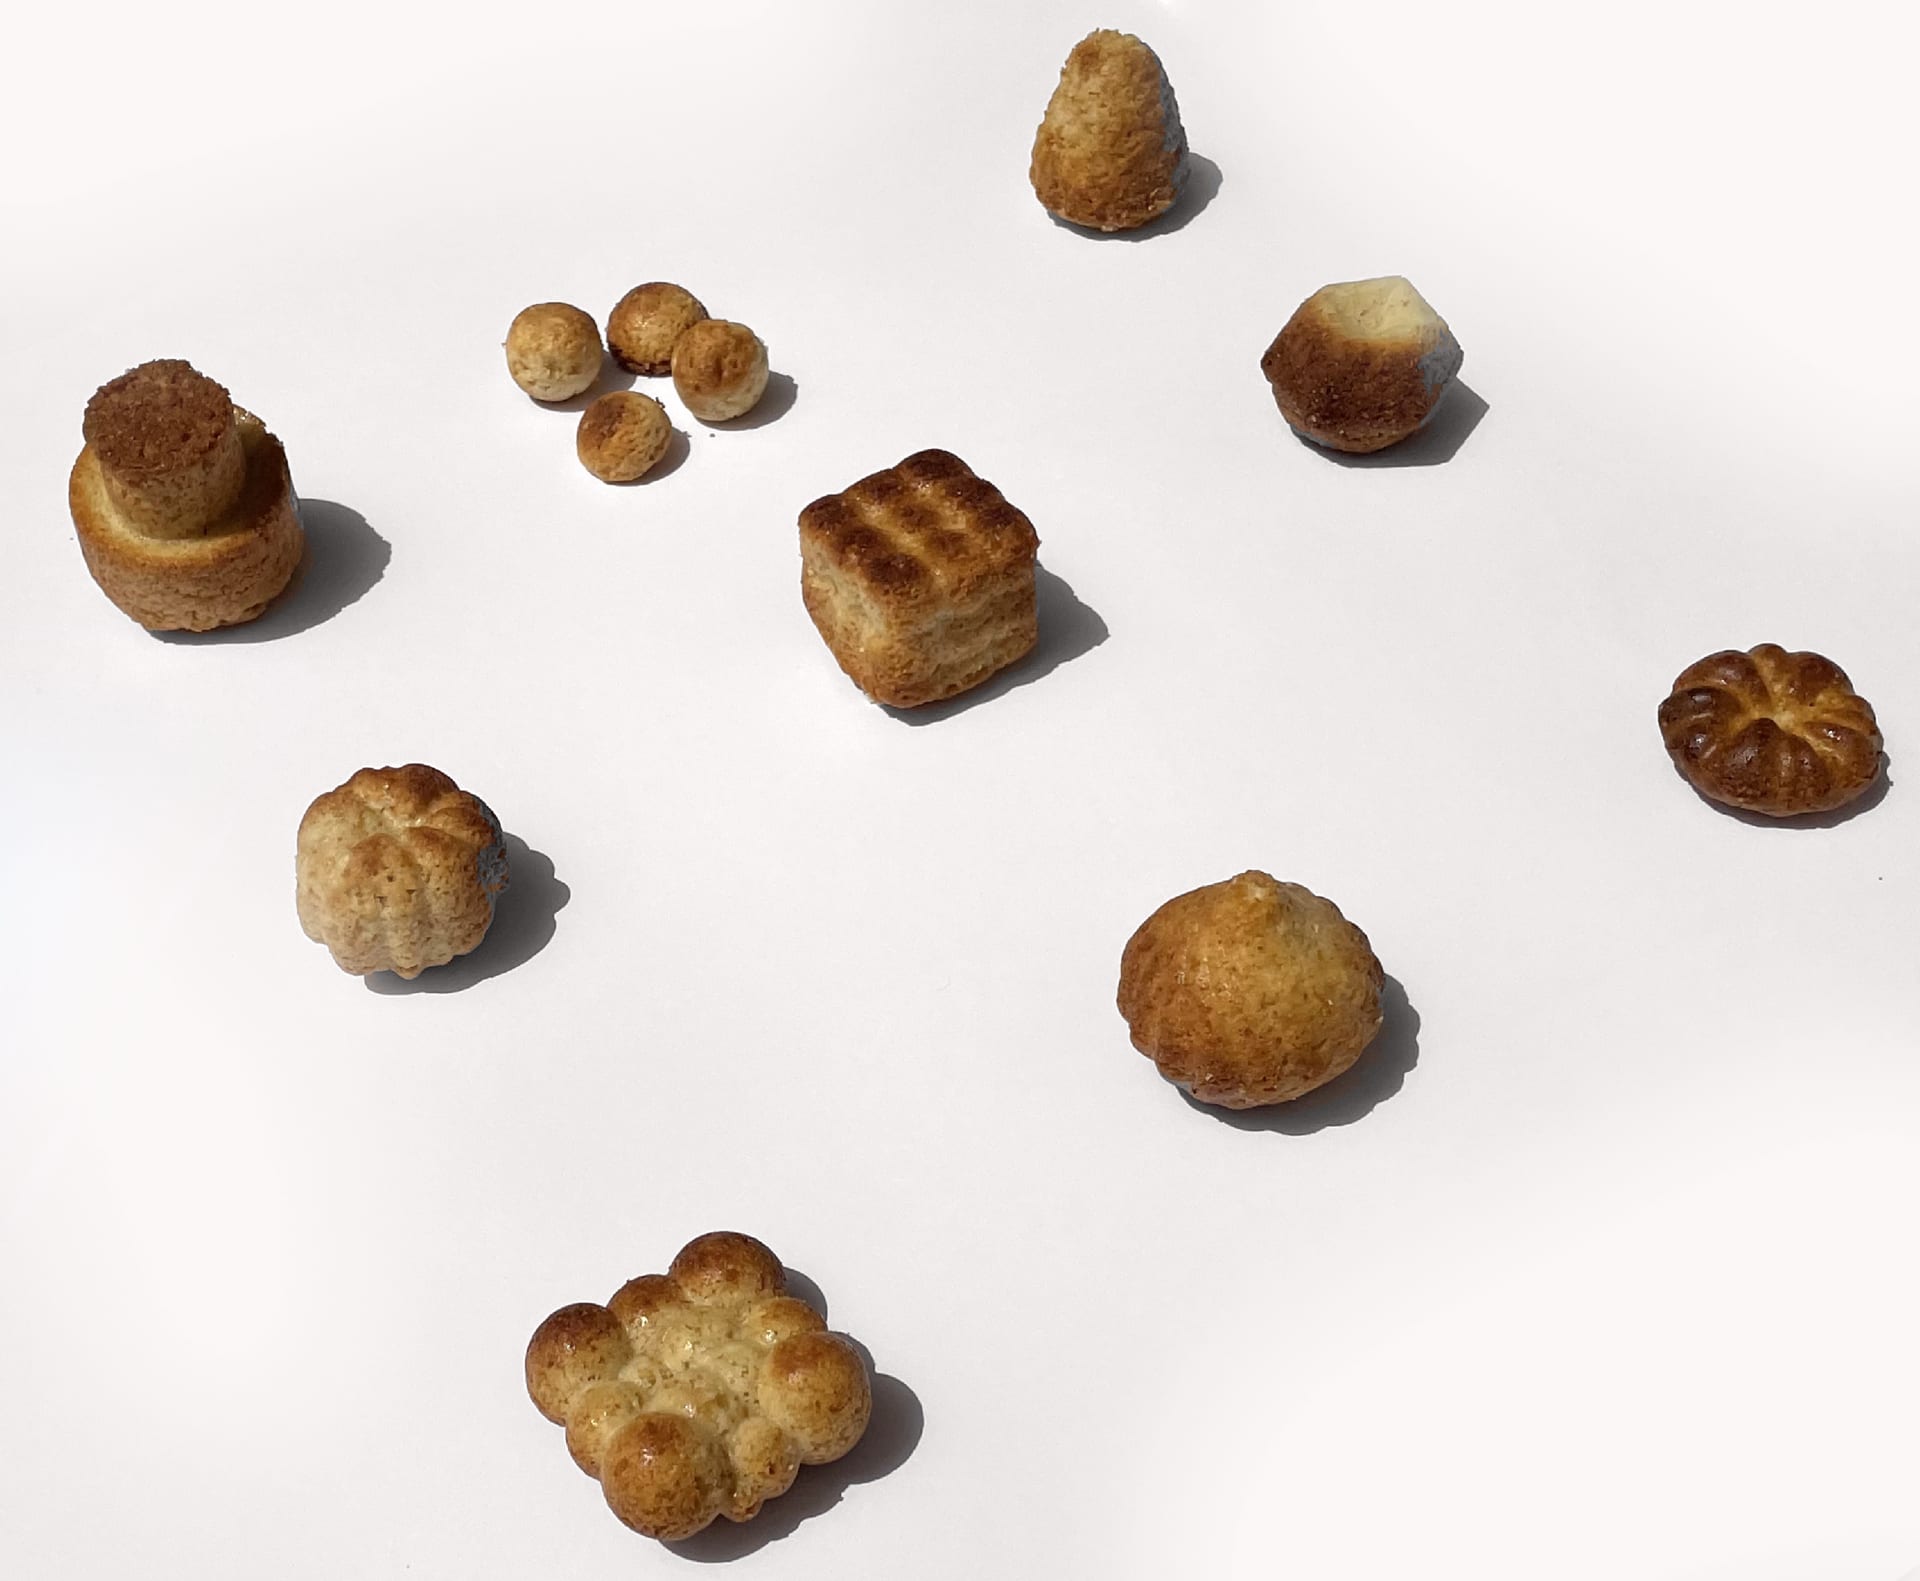 Experimental exploration of muffin morphologies